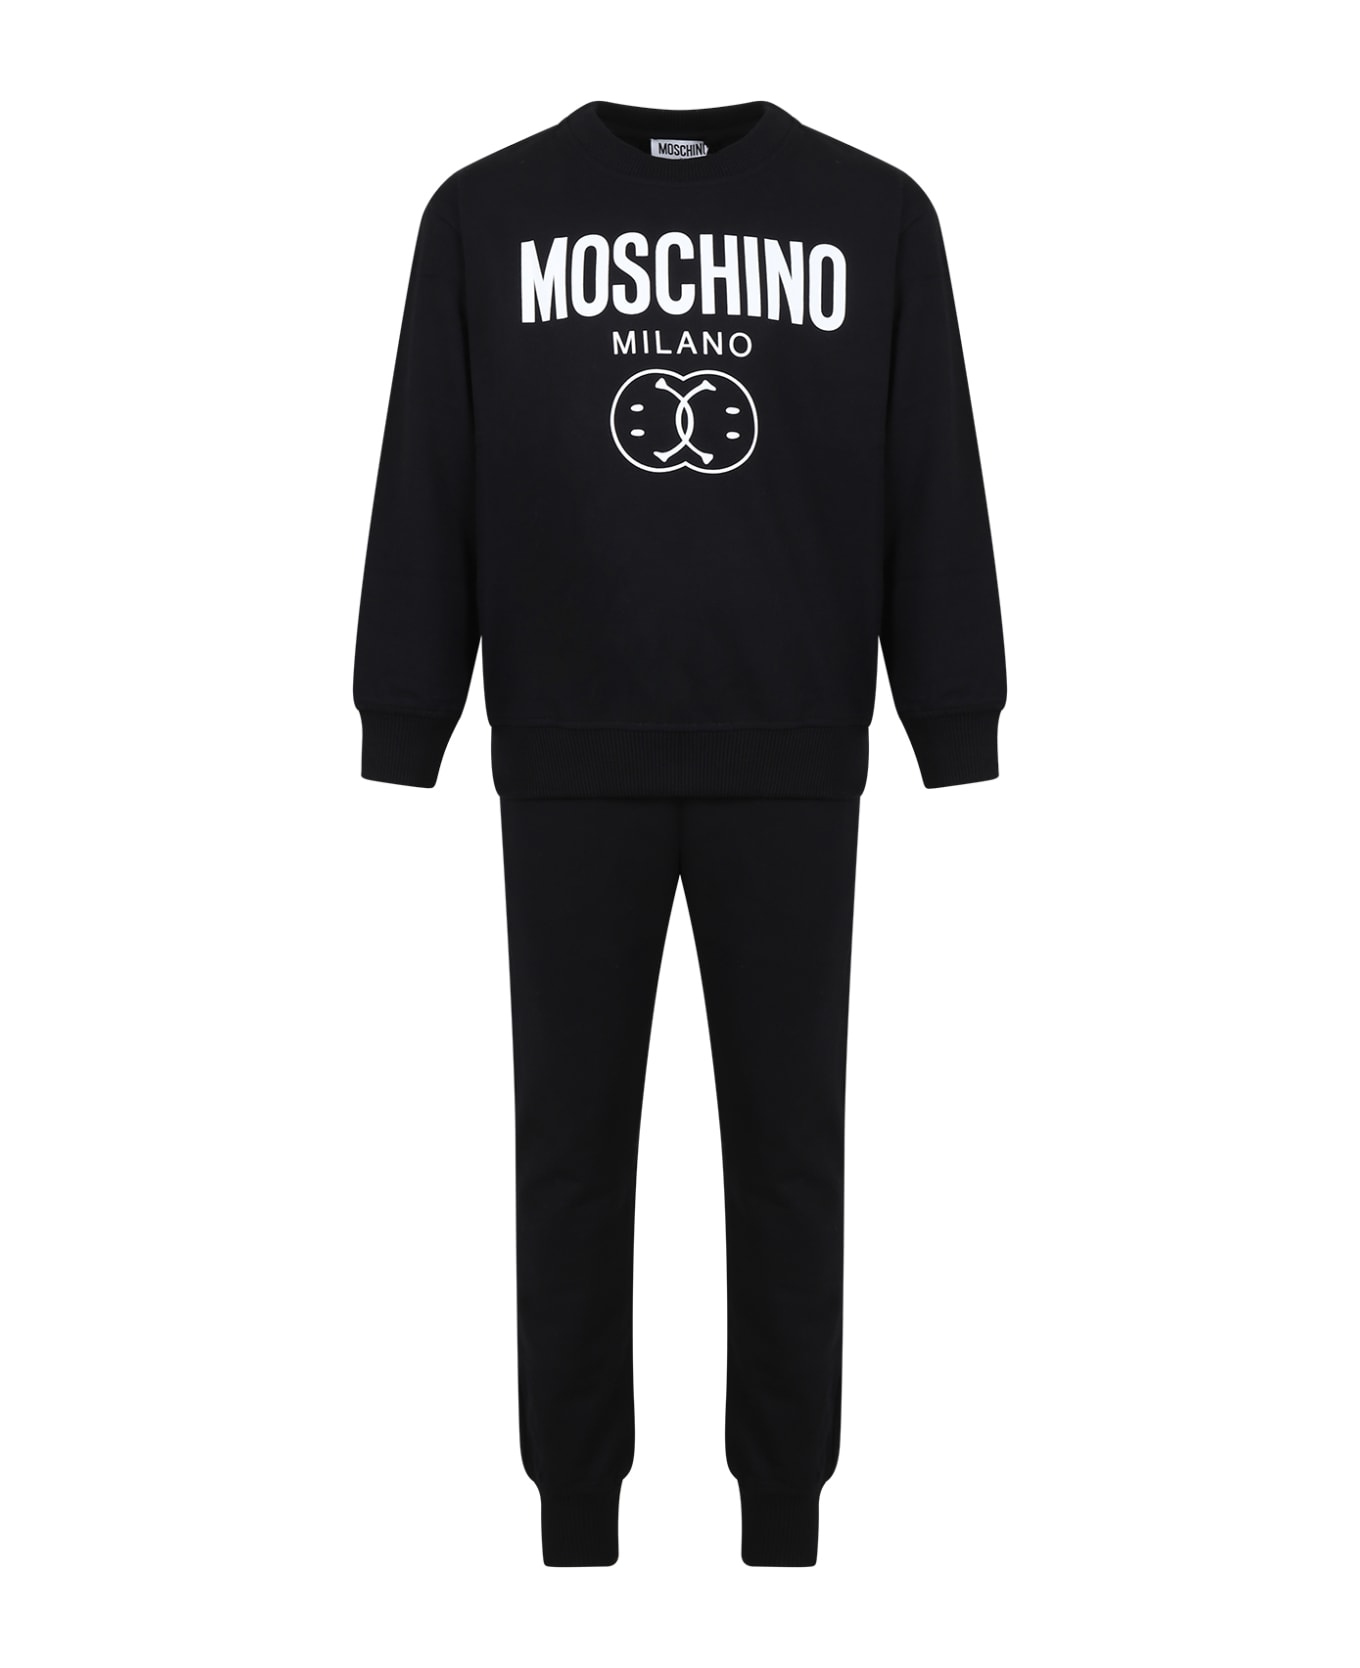 Moschino Black Suit For Kids With Smiley - Black